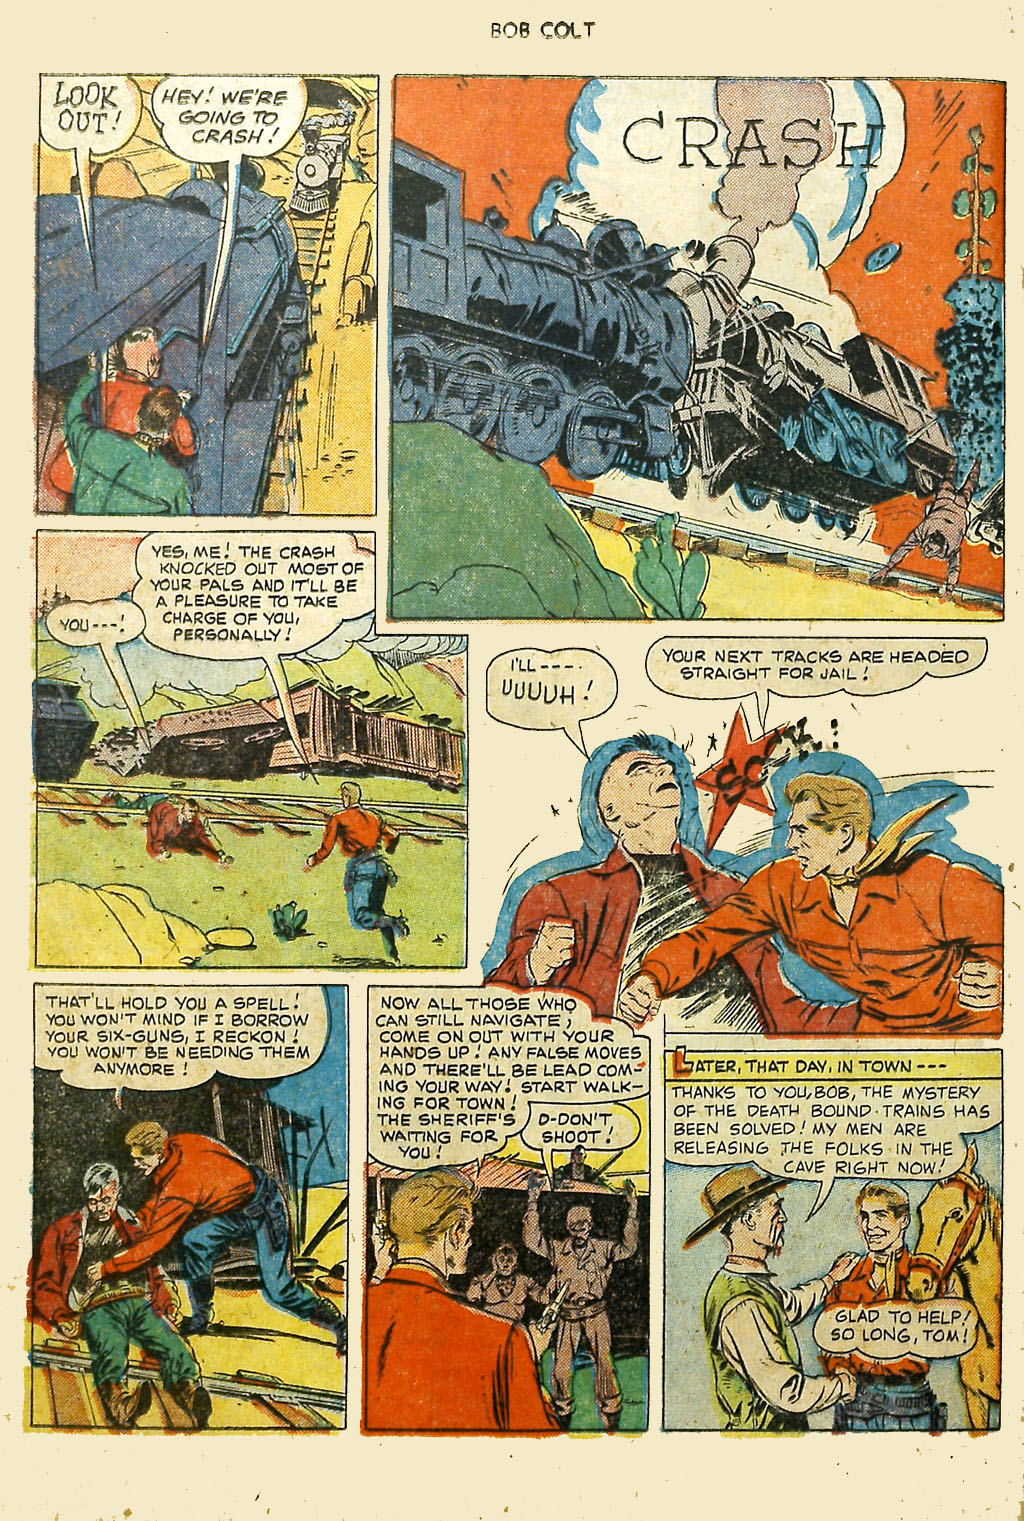 Read online Bob Colt Western comic -  Issue #2 - 12